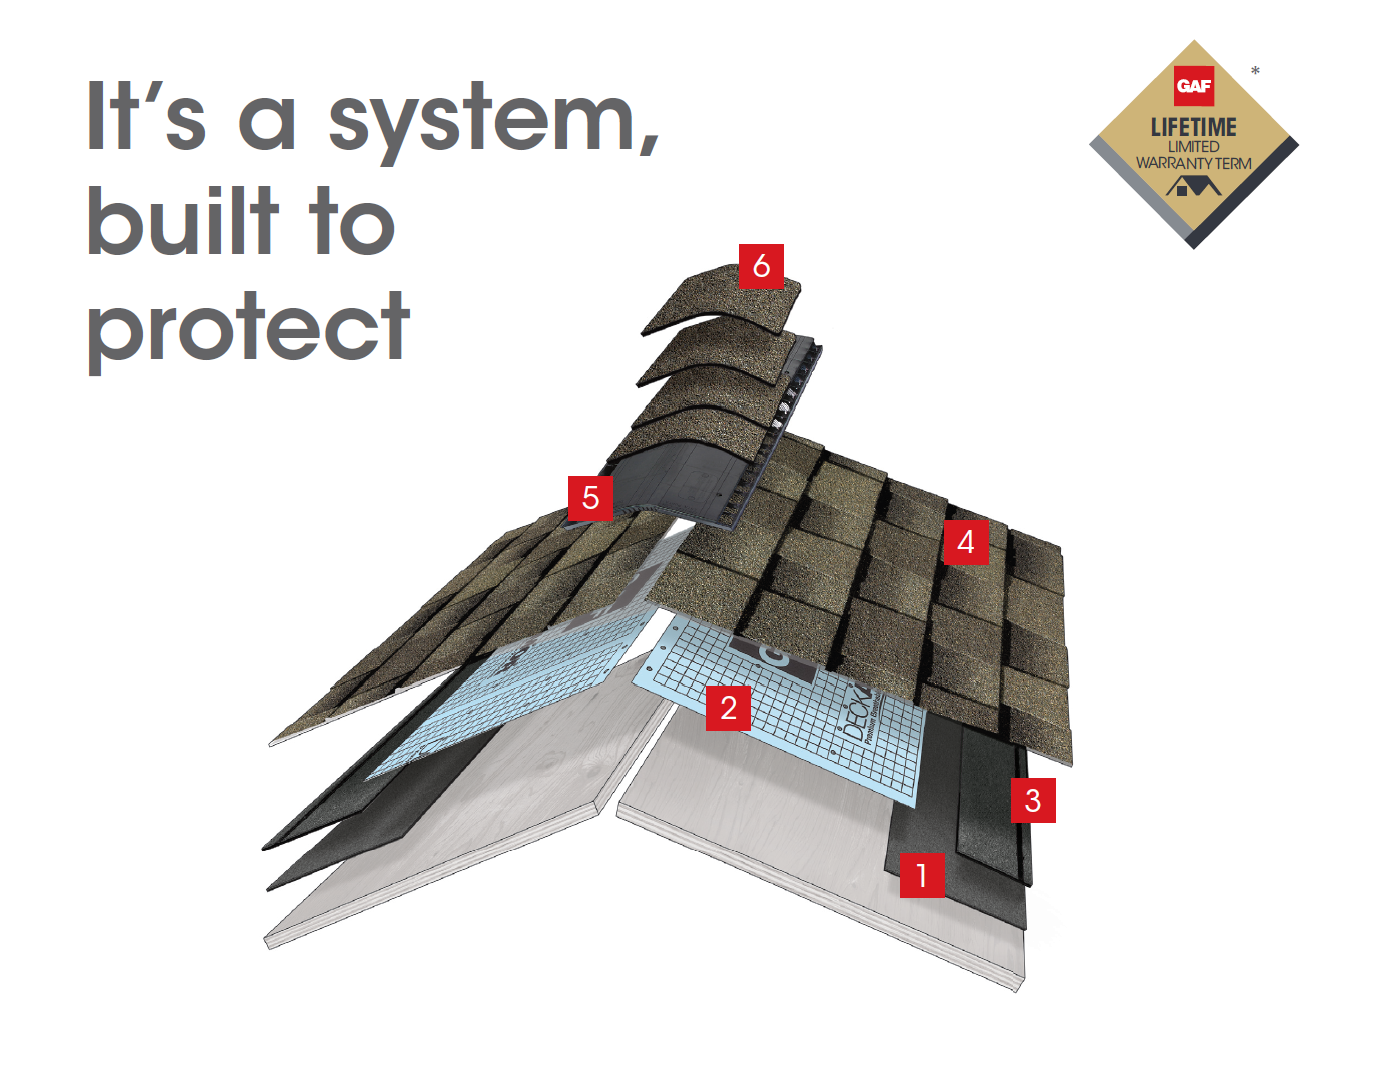 it 's a system built to protect a roof .